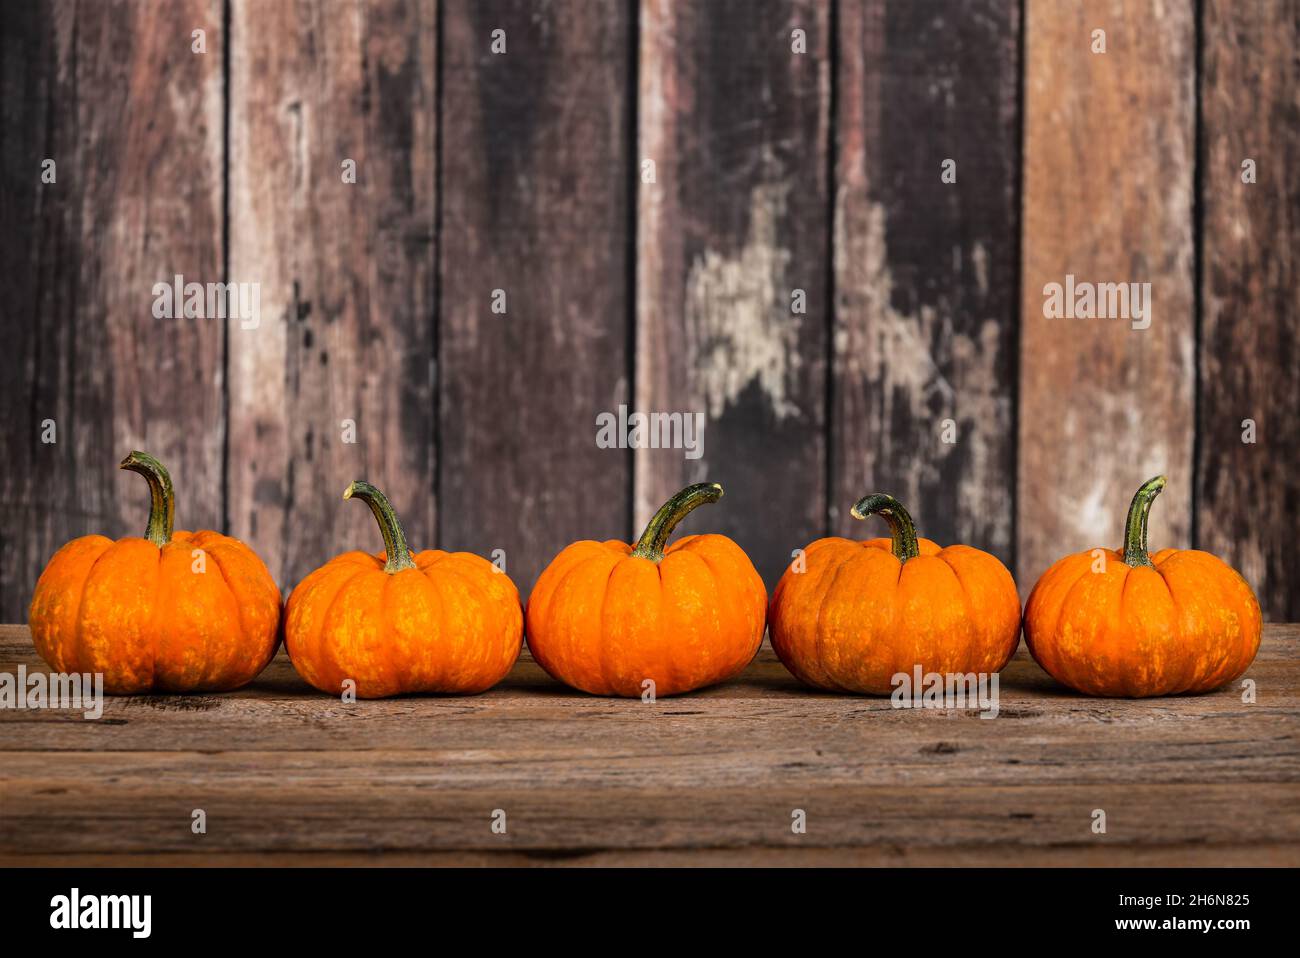 Mini pumpkins in a row against rustic wooden background, copy space Stock Photo